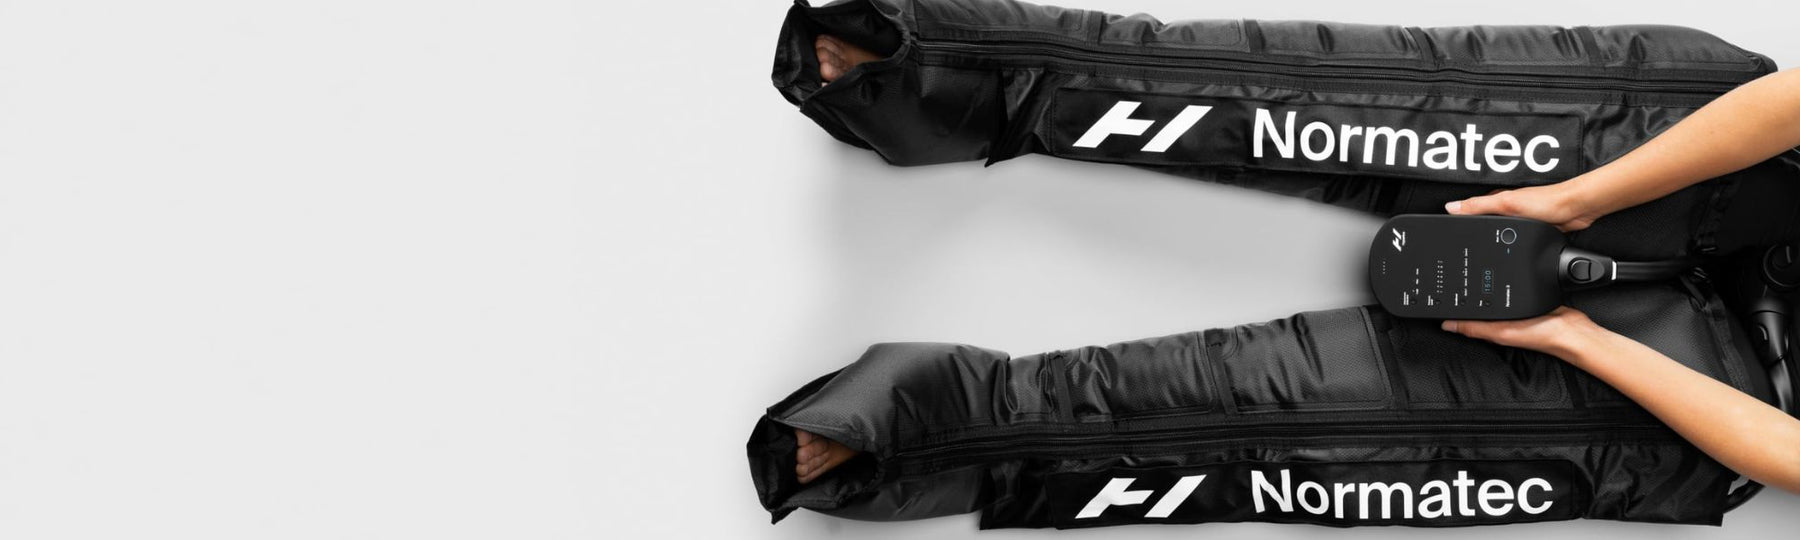 Compression Boots: Normatec 3 Legs vs Therabody RecoveryAir JetBoots